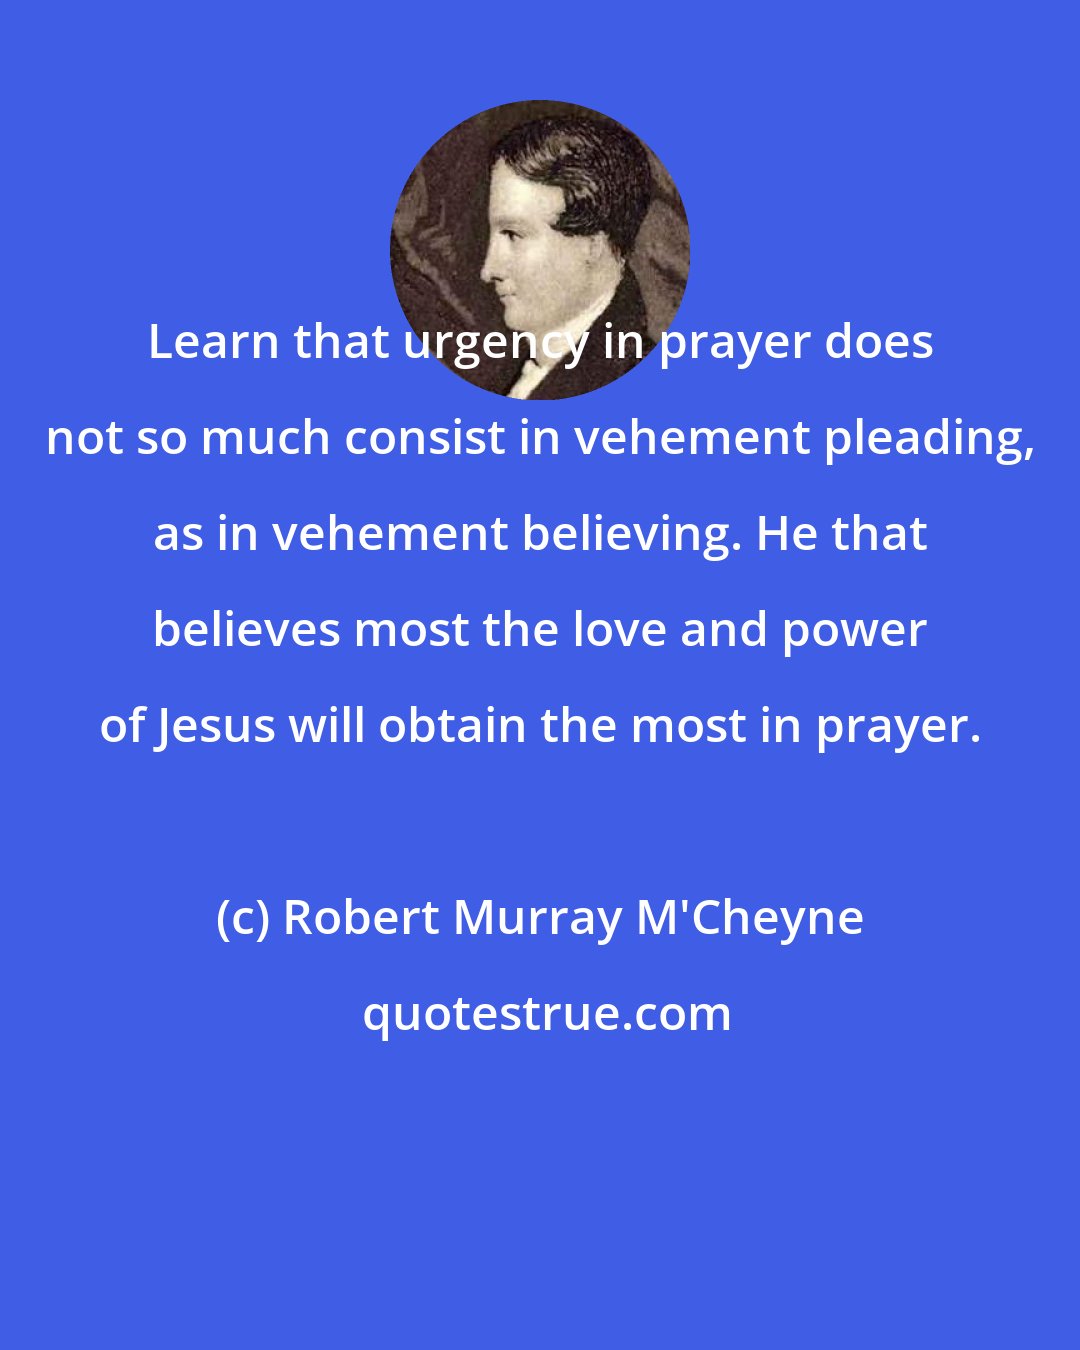 Robert Murray M'Cheyne: Learn that urgency in prayer does not so much consist in vehement pleading, as in vehement believing. He that believes most the love and power of Jesus will obtain the most in prayer.